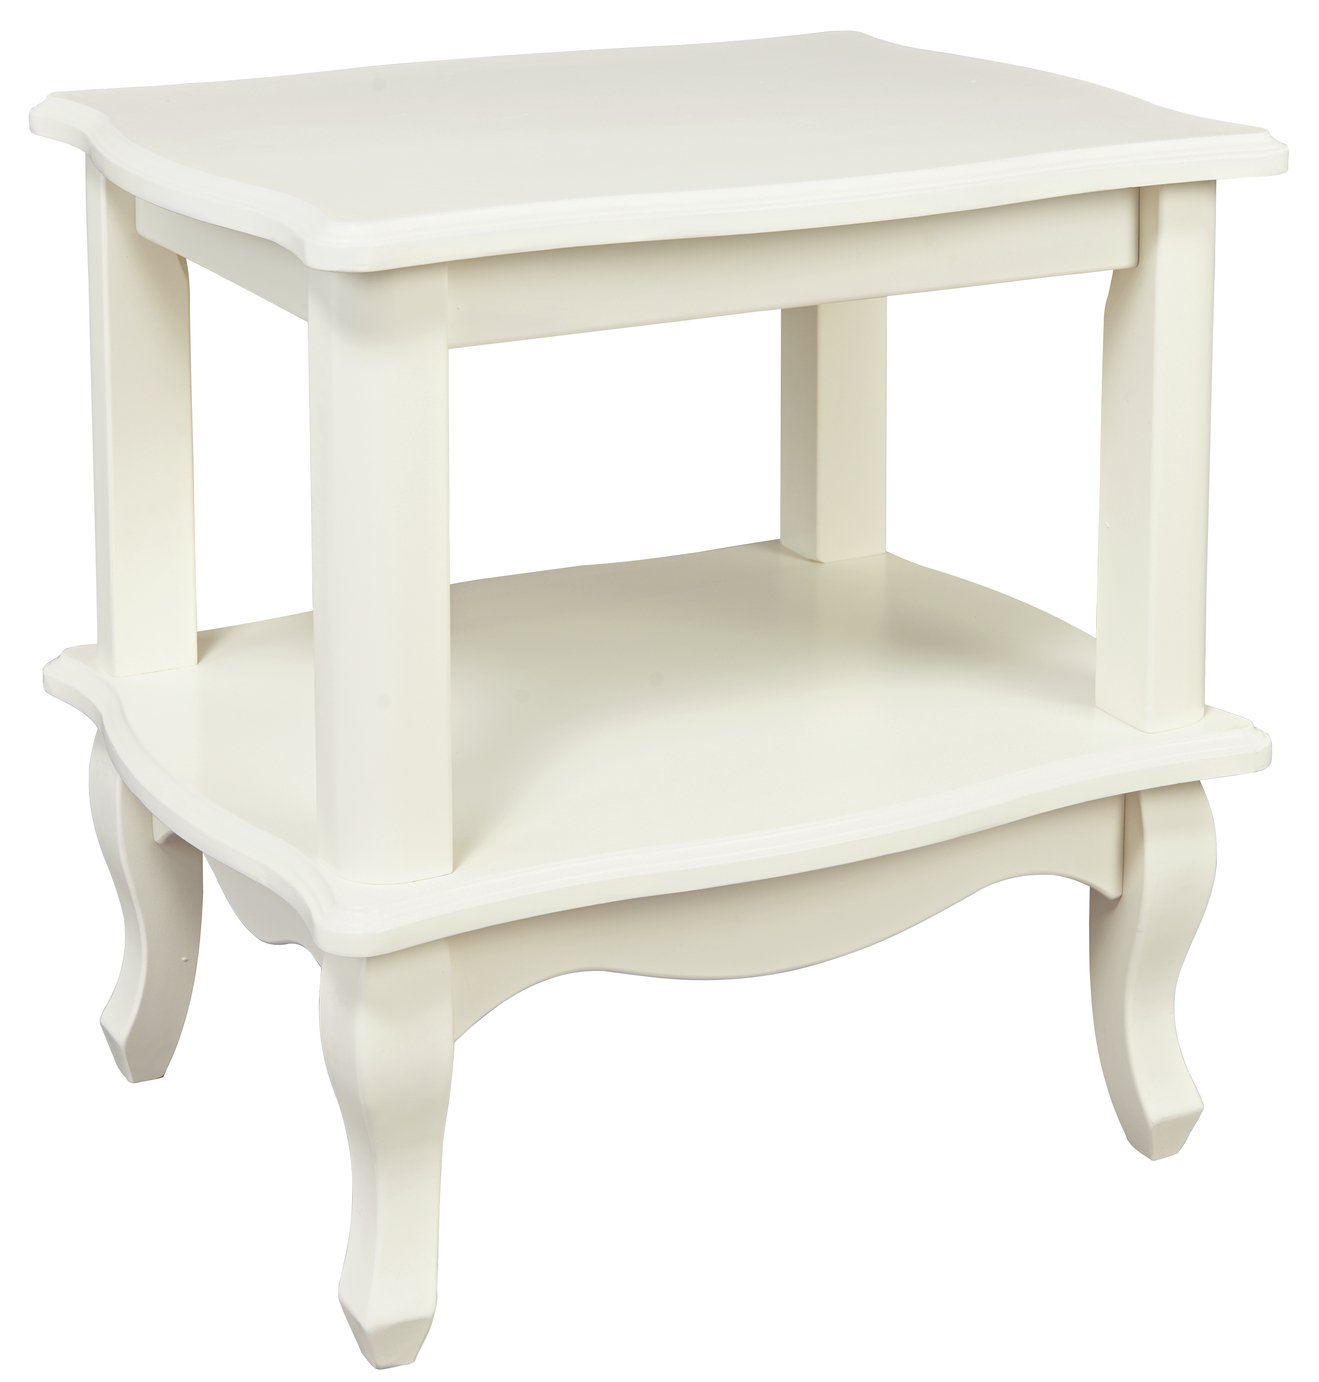 Argos Home Serenity End Table - Off-White